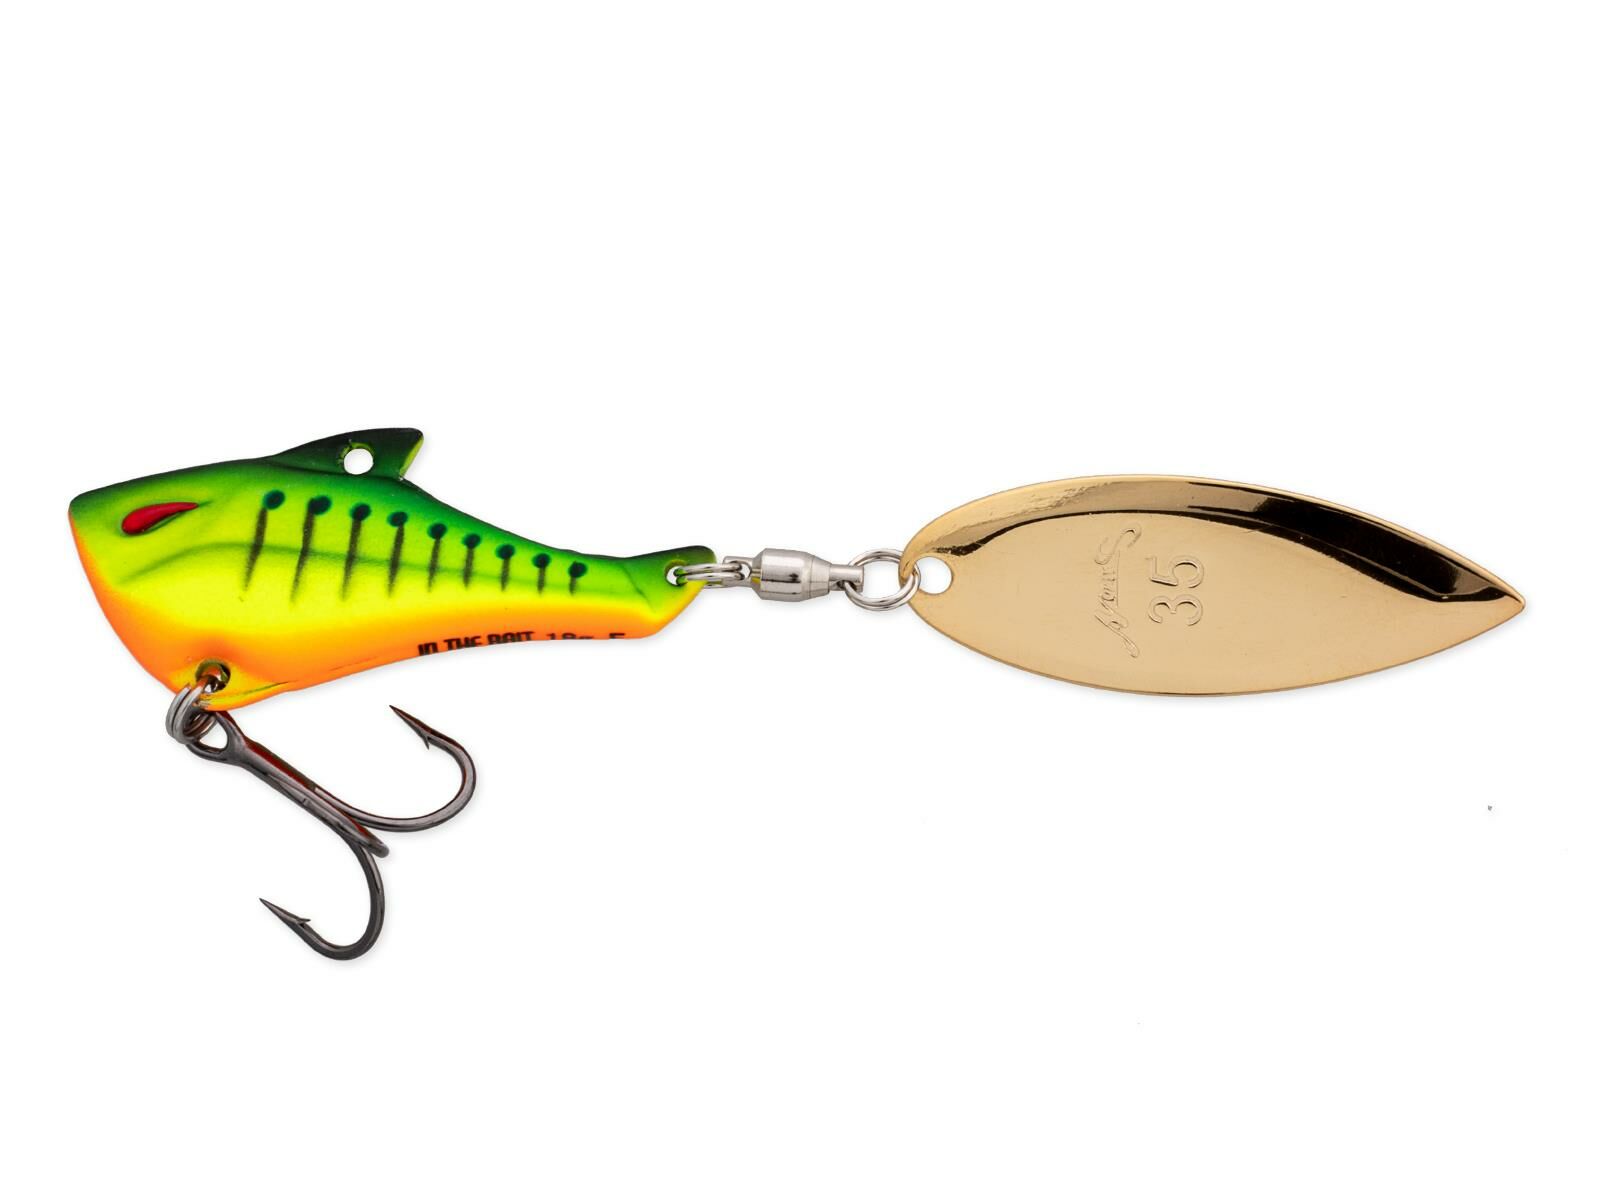 Fishing Lures Tail Spinners Metal Shad Lure Blade Baits for Bass